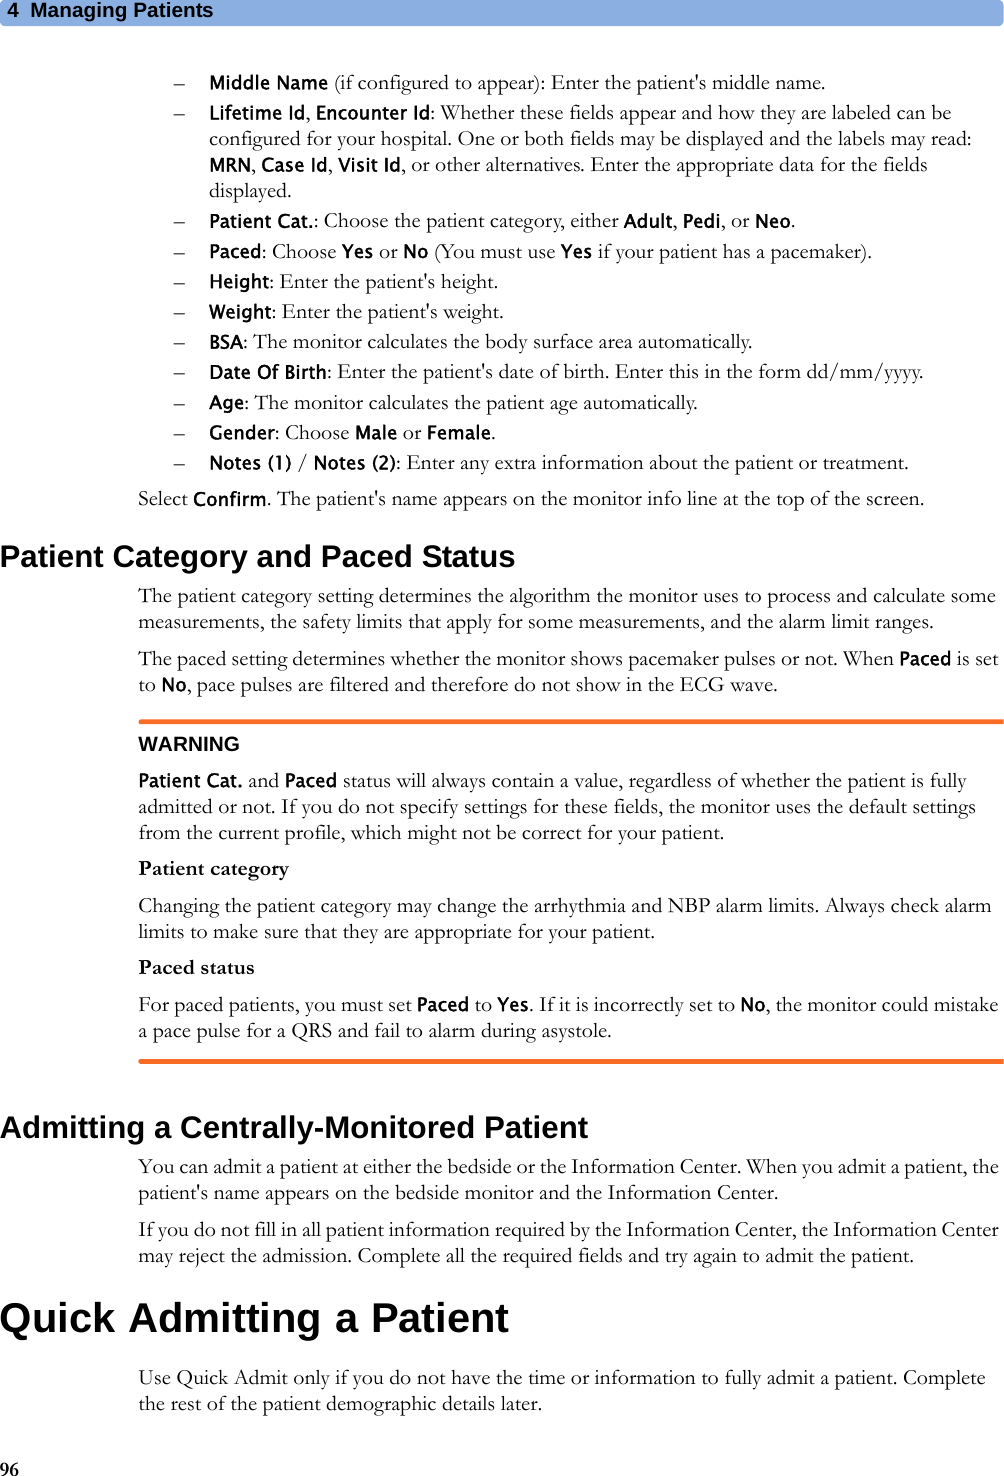 4 Managing Patients96–Middle Name (if configured to appear): Enter the patient&apos;s middle name.–Lifetime Id, Encounter Id: Whether these fields appear and how they are labeled can be configured for your hospital. One or both fields may be displayed and the labels may read: MRN, Case Id, Visit Id, or other alternatives. Enter the appropriate data for the fields displayed.–Patient Cat.: Choose the patient category, either Adult, Pedi, or Neo.–Paced: Choose Yes or No (You must use Yes if your patient has a pacemaker).–Height: Enter the patient&apos;s height.–Weight: Enter the patient&apos;s weight.–BSA: The monitor calculates the body surface area automatically.–Date Of Birth: Enter the patient&apos;s date of birth. Enter this in the form dd/mm/yyyy.–Age: The monitor calculates the patient age automatically.–Gender: Choose Male or Female.–Notes (1) / Notes (2): Enter any extra information about the patient or treatment.Select Confirm. The patient&apos;s name appears on the monitor info line at the top of the screen.Patient Category and Paced StatusThe patient category setting determines the algorithm the monitor uses to process and calculate some measurements, the safety limits that apply for some measurements, and the alarm limit ranges.The paced setting determines whether the monitor shows pacemaker pulses or not. When Paced is set to No, pace pulses are filtered and therefore do not show in the ECG wave.WARNINGPatient Cat. and Paced status will always contain a value, regardless of whether the patient is fully admitted or not. If you do not specify settings for these fields, the monitor uses the default settings from the current profile, which might not be correct for your patient.Patient categoryChanging the patient category may change the arrhythmia and NBP alarm limits. Always check alarm limits to make sure that they are appropriate for your patient.Paced statusFor paced patients, you must set Paced to Yes. If it is incorrectly set to No, the monitor could mistake a pace pulse for a QRS and fail to alarm during asystole.Admitting a Centrally-Monitored PatientYou can admit a patient at either the bedside or the Information Center. When you admit a patient, the patient&apos;s name appears on the bedside monitor and the Information Center.If you do not fill in all patient information required by the Information Center, the Information Center may reject the admission. Complete all the required fields and try again to admit the patient.Quick Admitting a PatientUse Quick Admit only if you do not have the time or information to fully admit a patient. Complete the rest of the patient demographic details later.